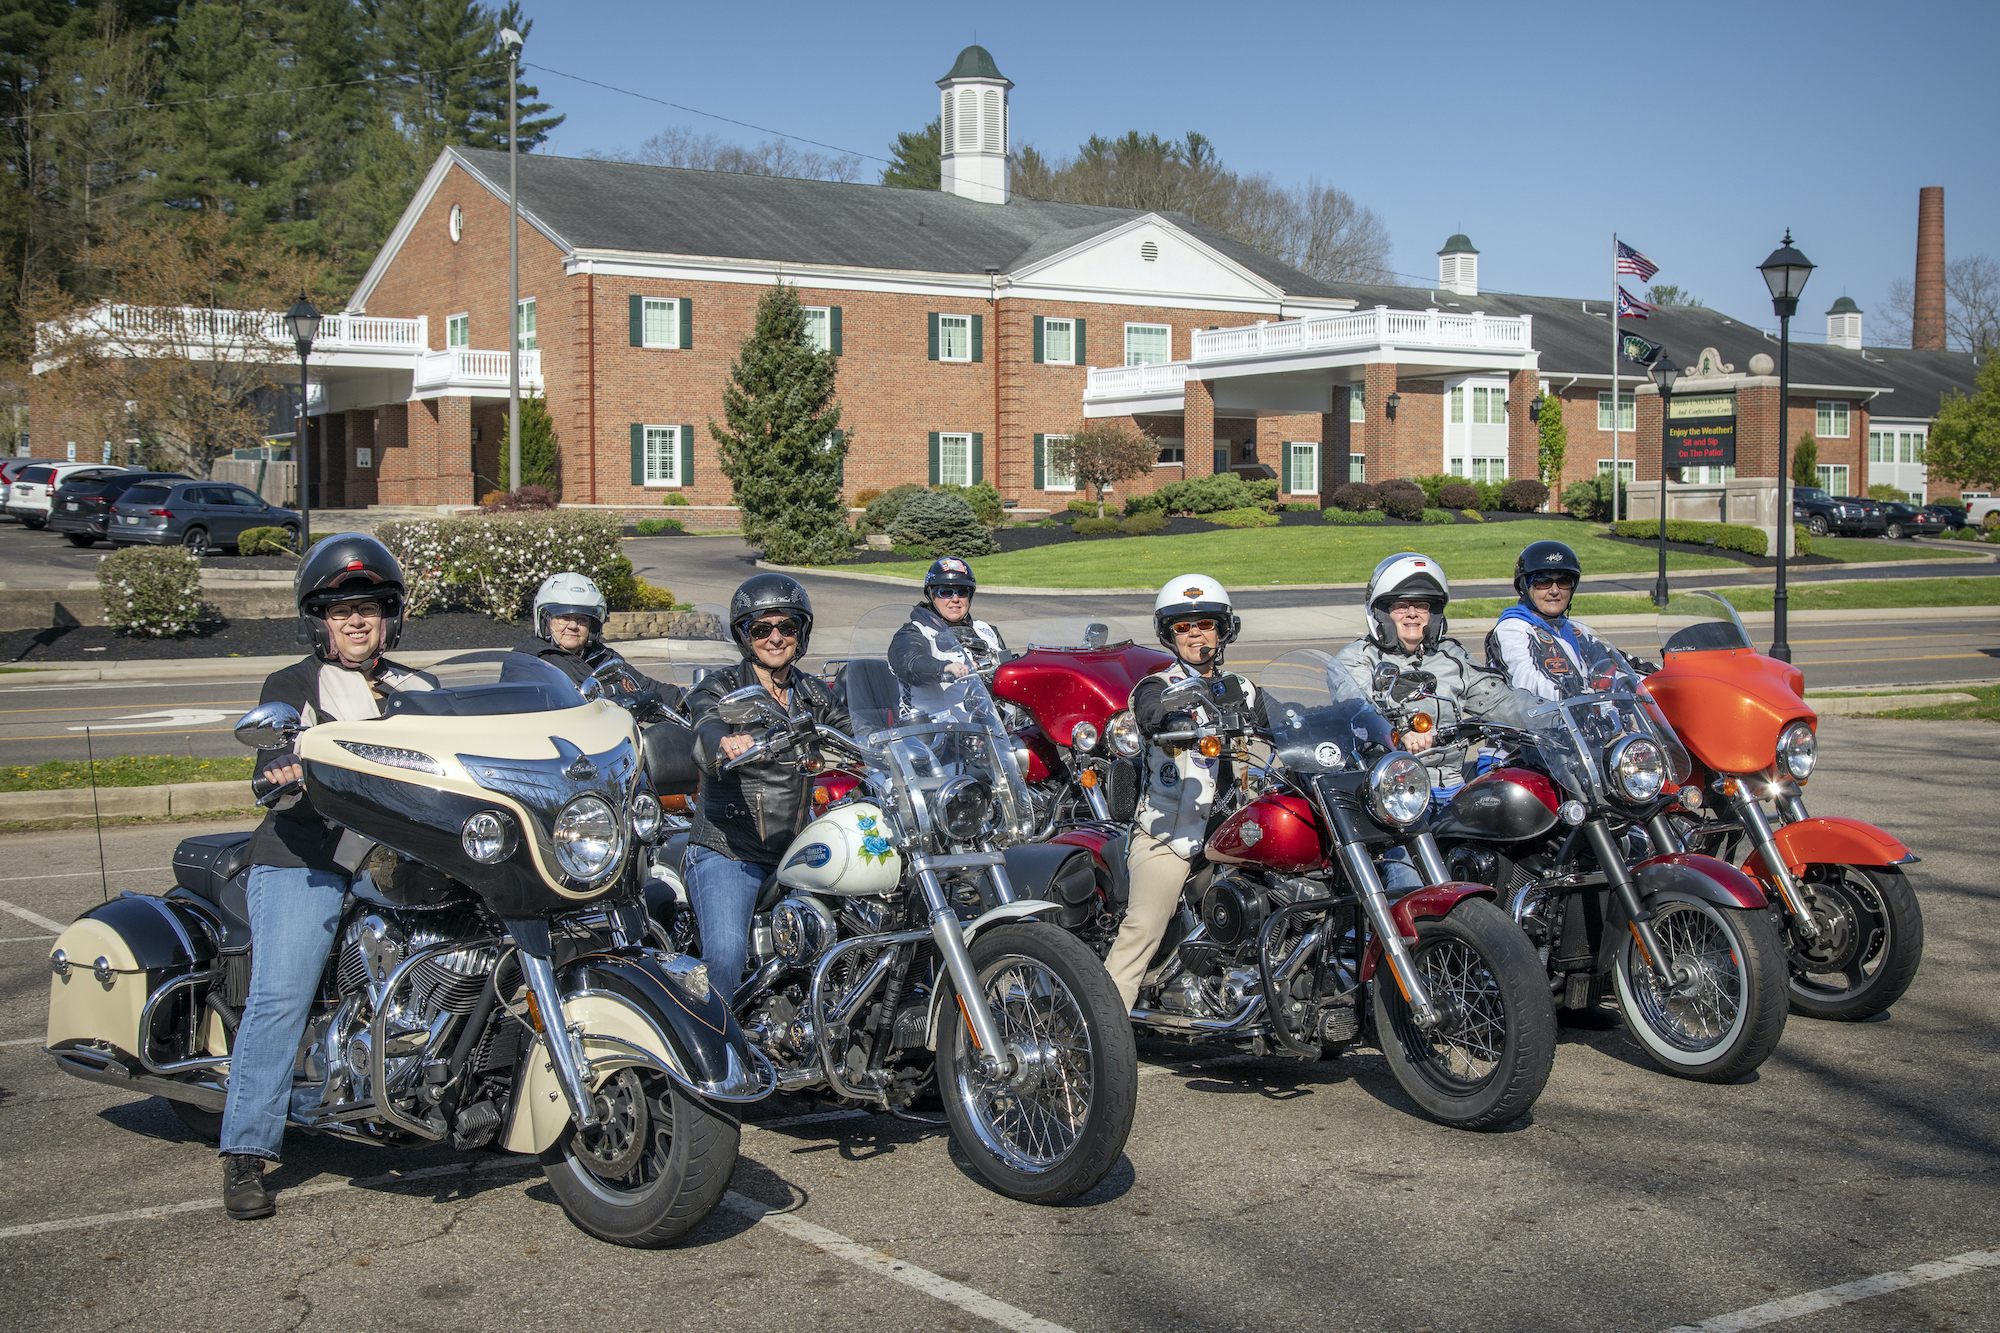 Join other women riders on this innaugural women's rally in beautiful Athens, Ohio. [Photograph by Joel Prince]